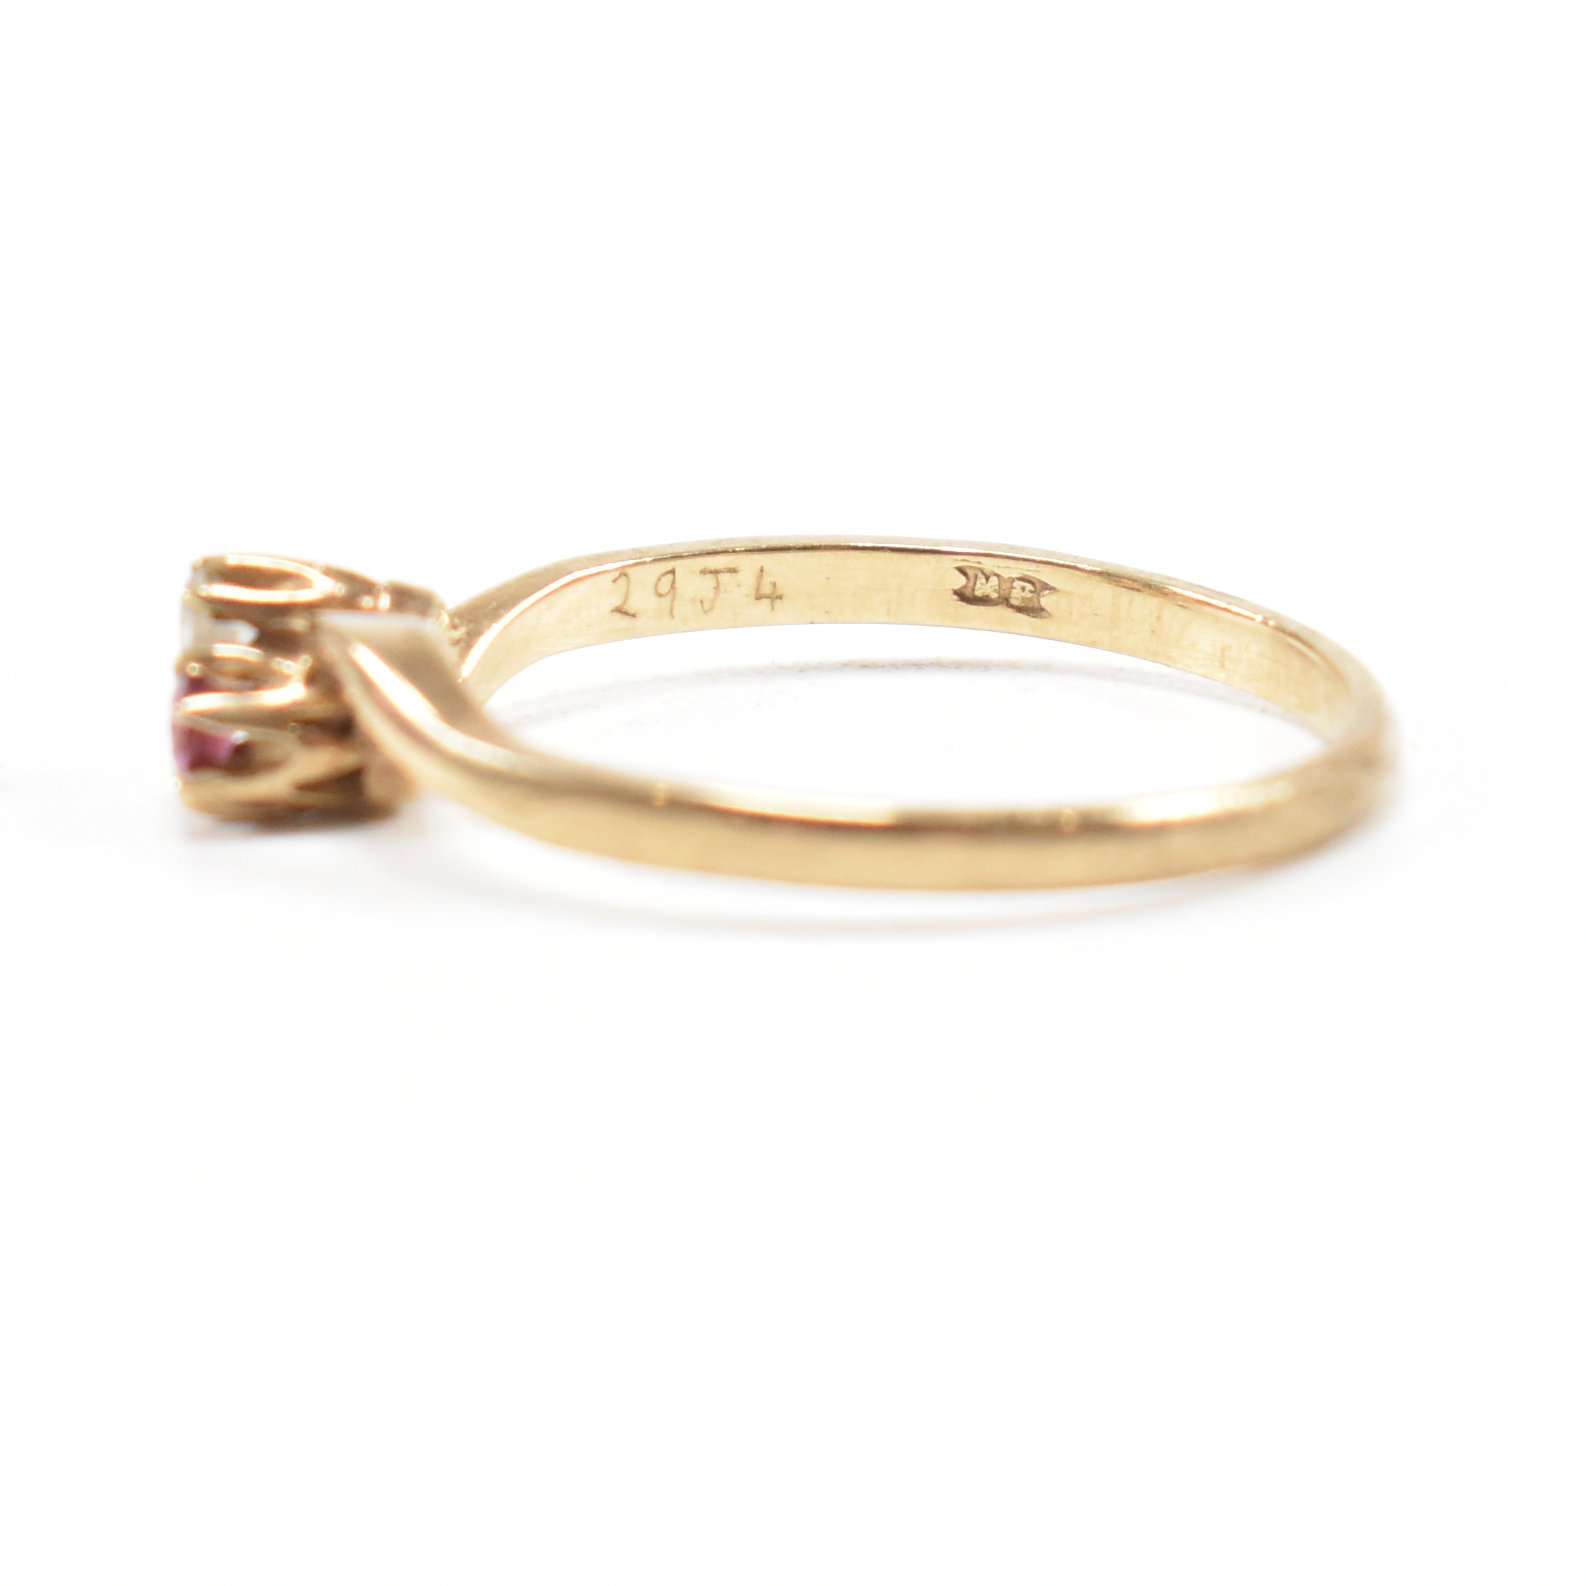 VINTAGE HALLMARKED 9CT GOLD DIAMOND & RUBY CROSSOVER RING - Image 6 of 11